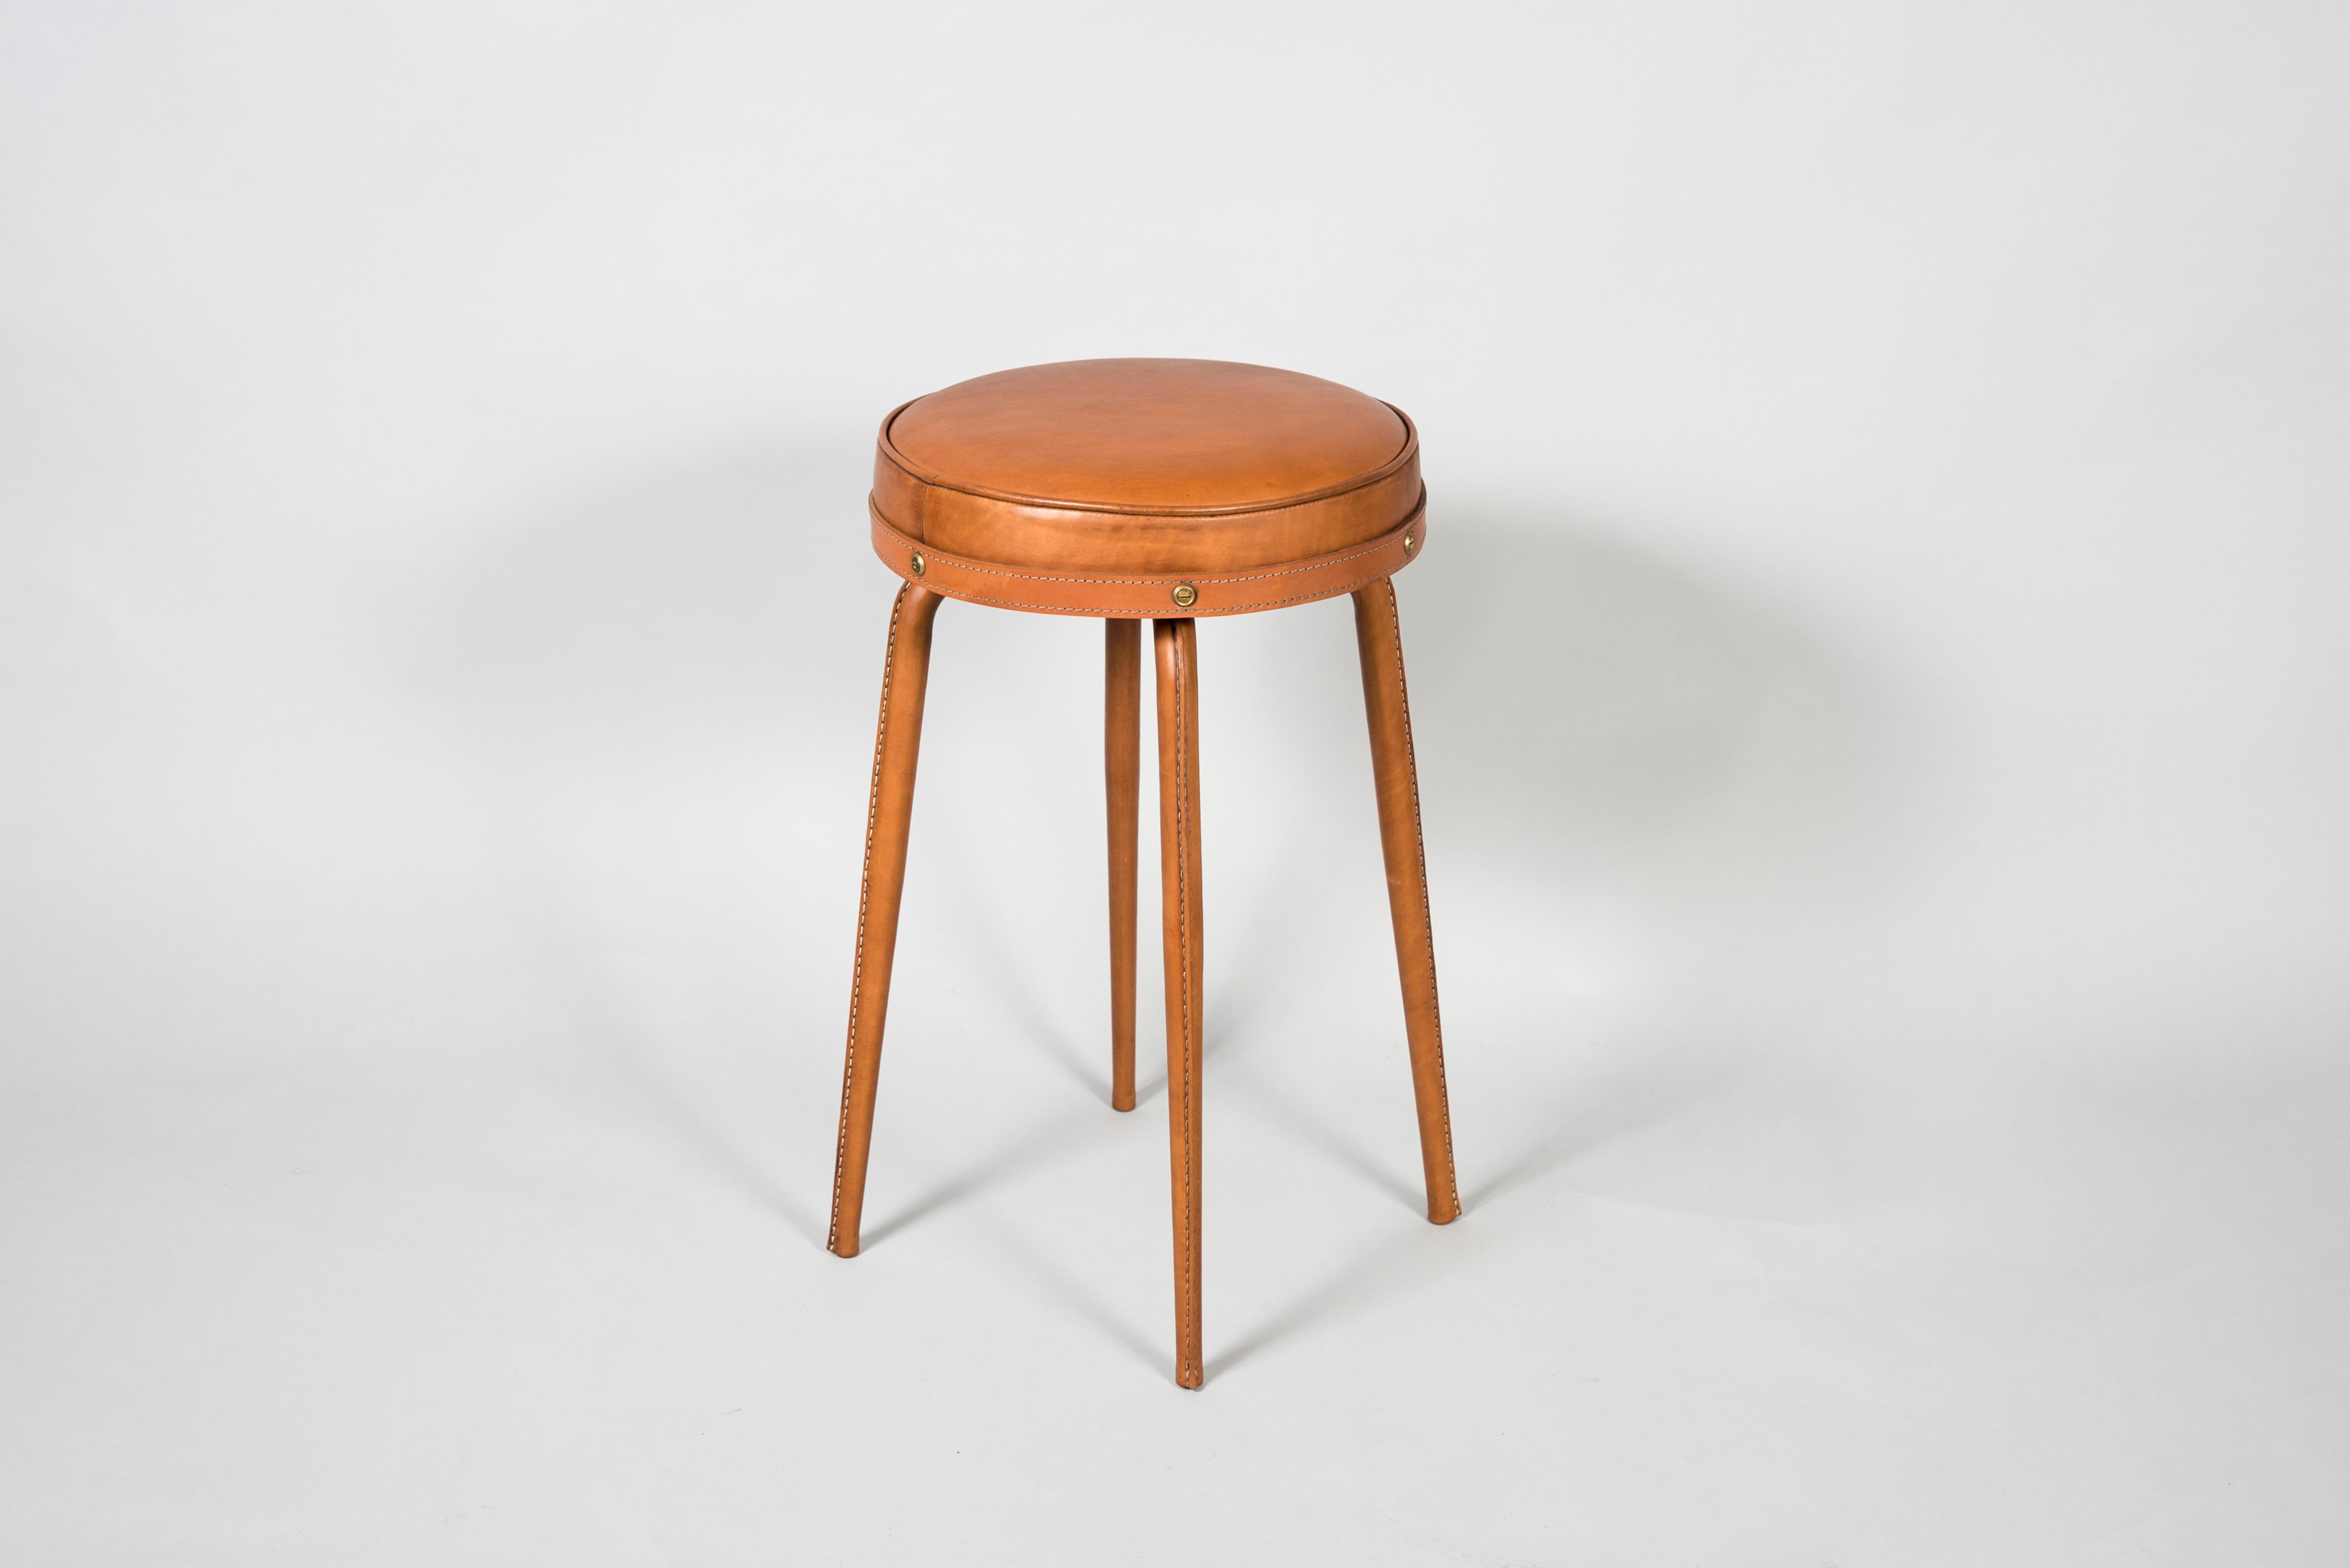 1950's Stitched leather stools designed by Jacques Adnet
France.